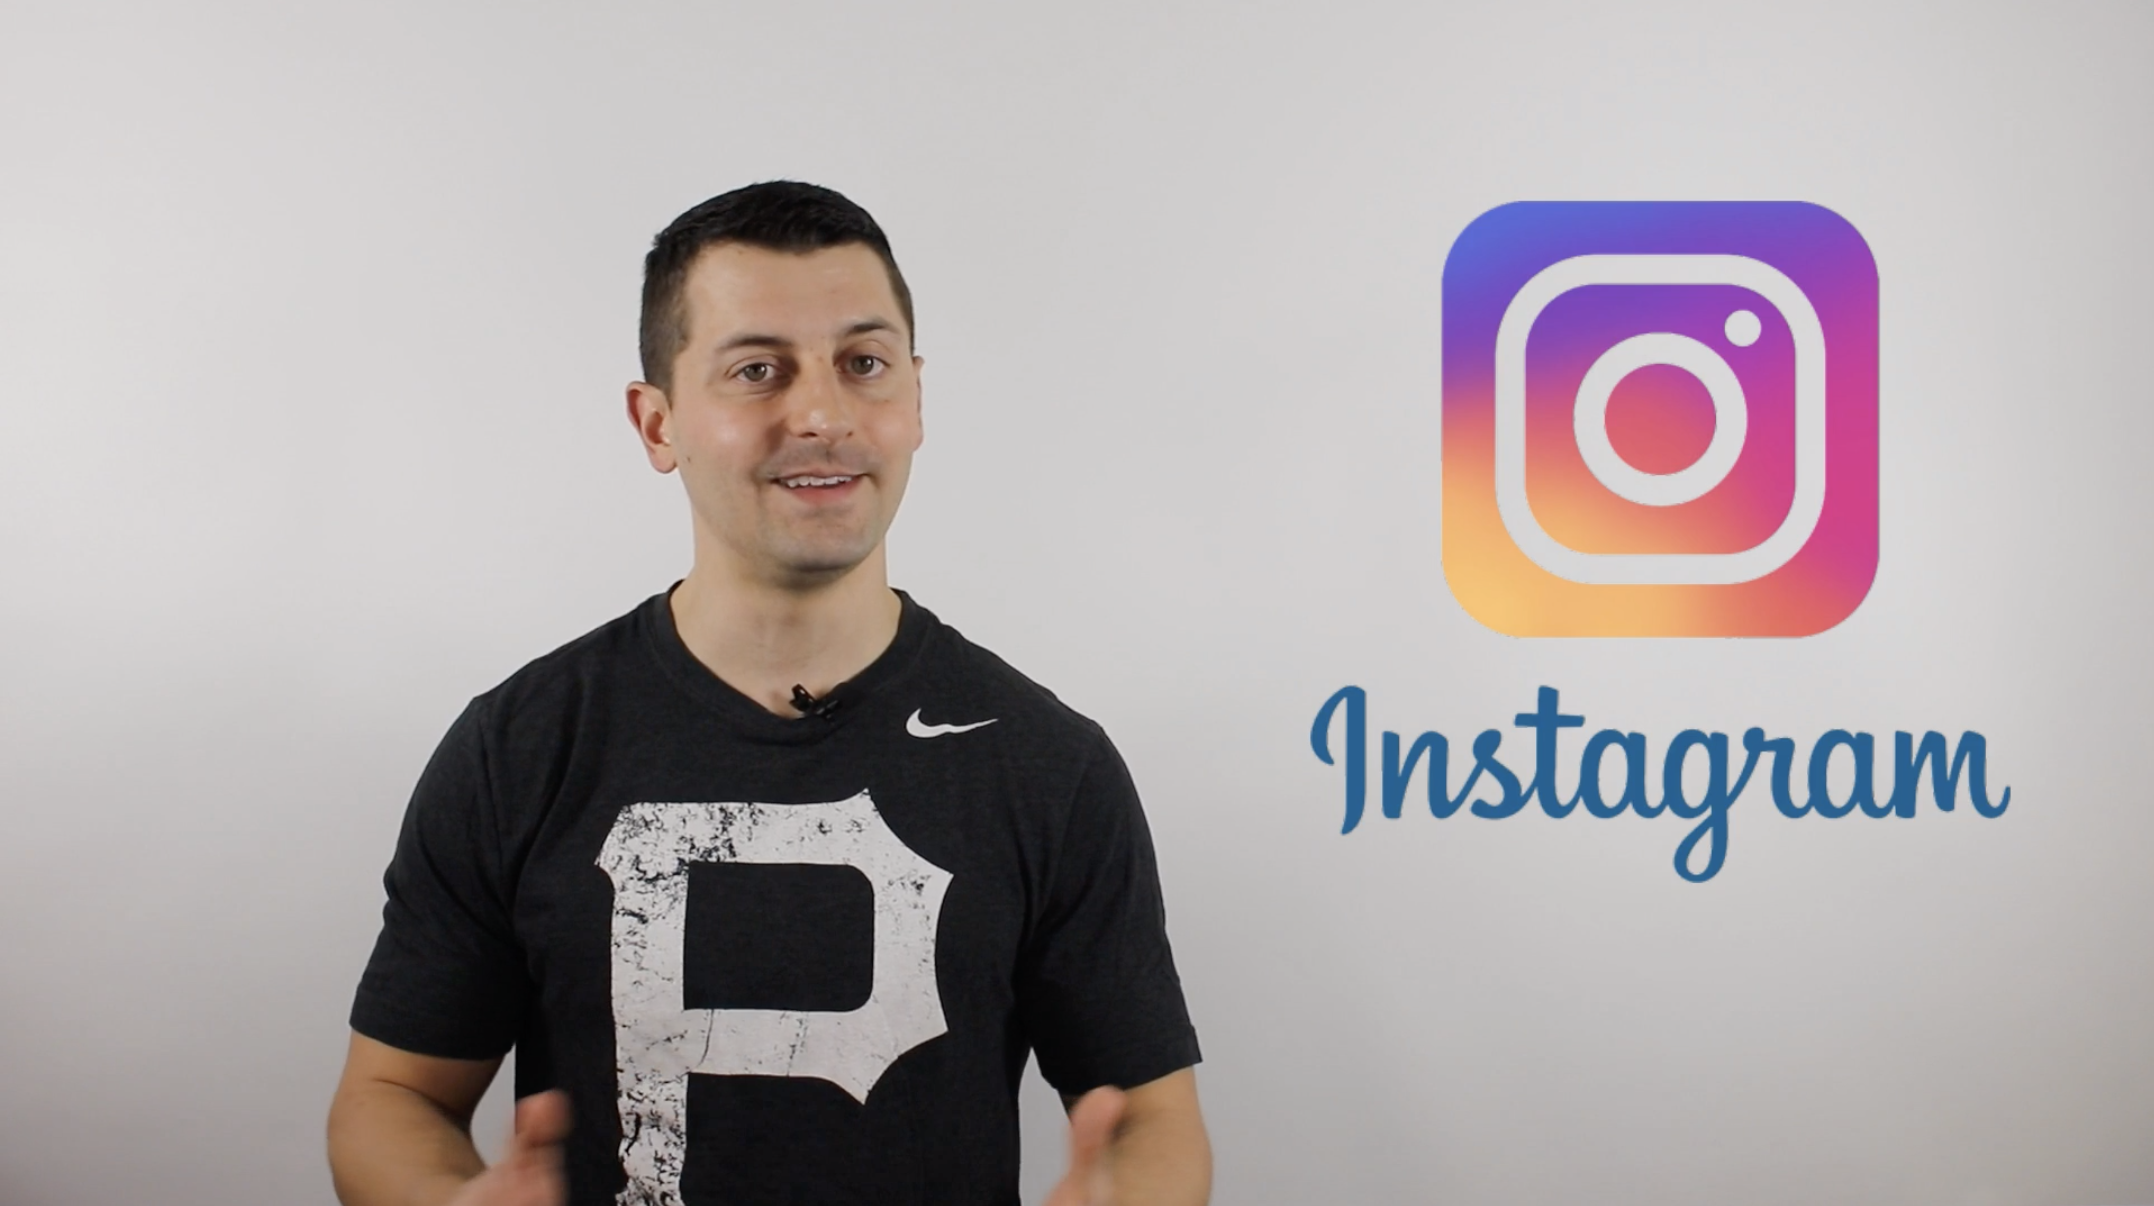 how to reach people on instagram, how to reach influential people on instagram, how to grow on instagram, tips for growing on instagram, how to market on instagram